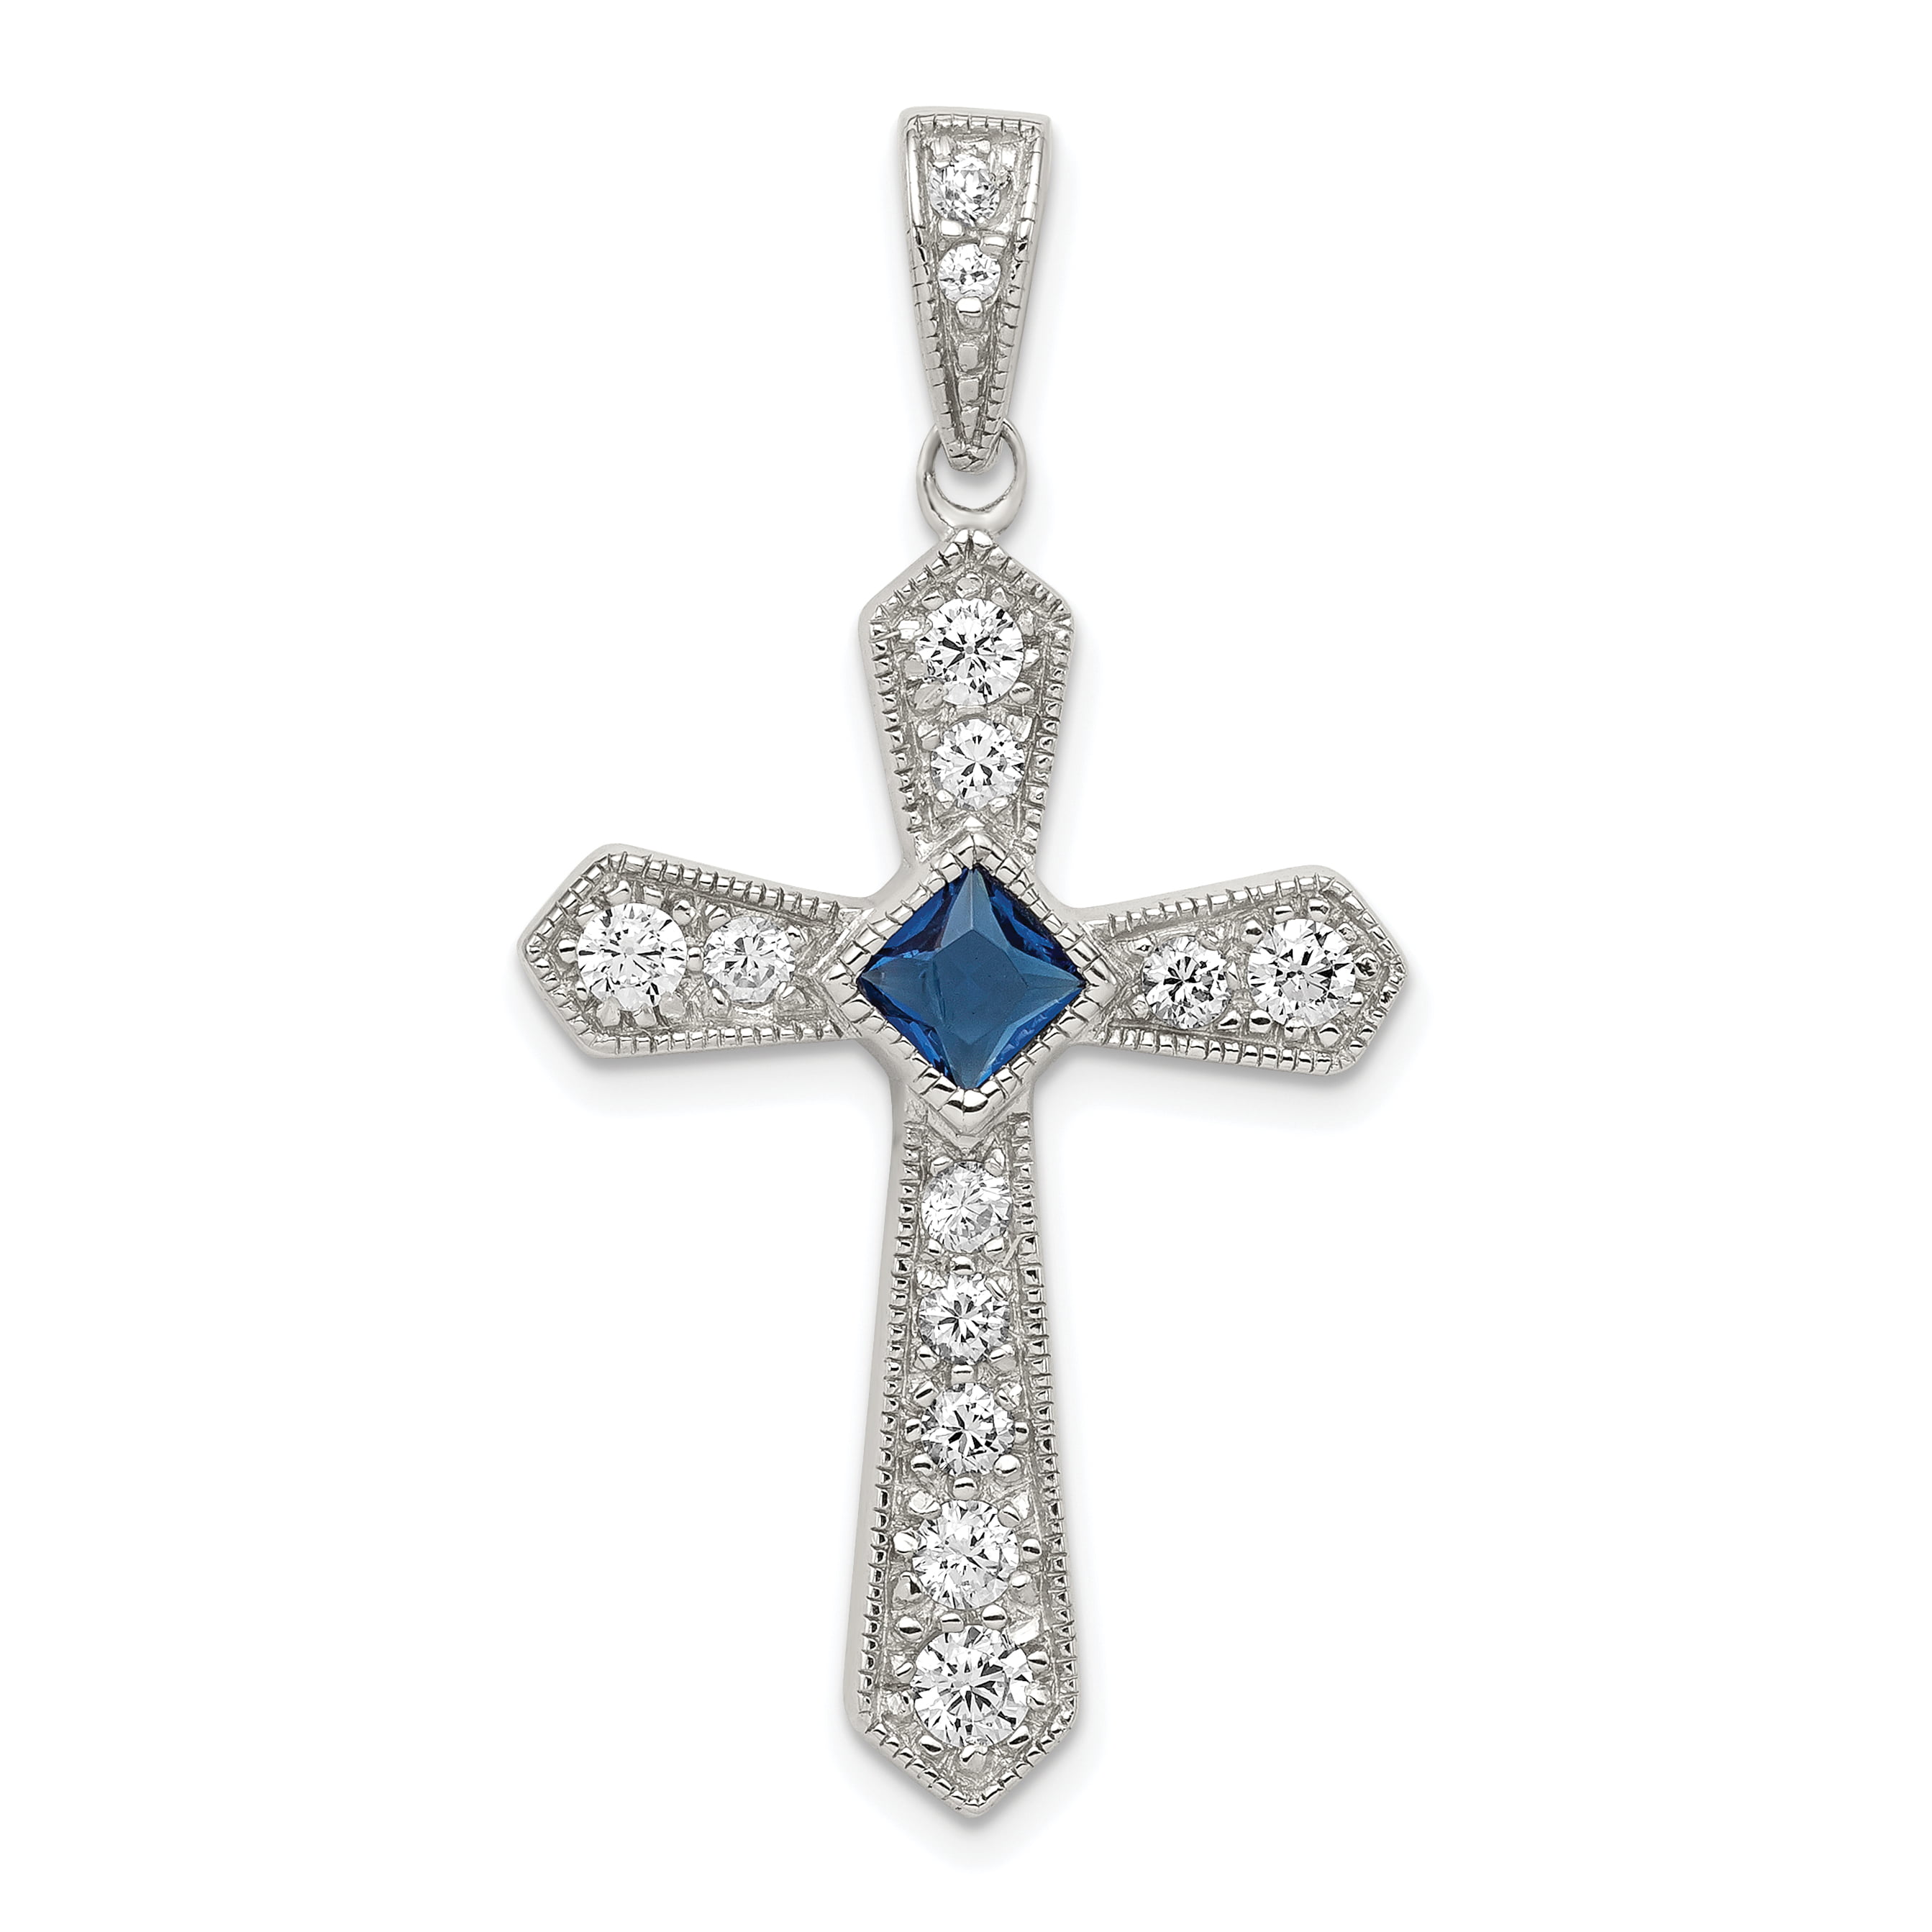 Saris and Things 925 Sterling Silver Womens Round Cubic Zirconia CZ Cross Religious Fashion Charm Pendant